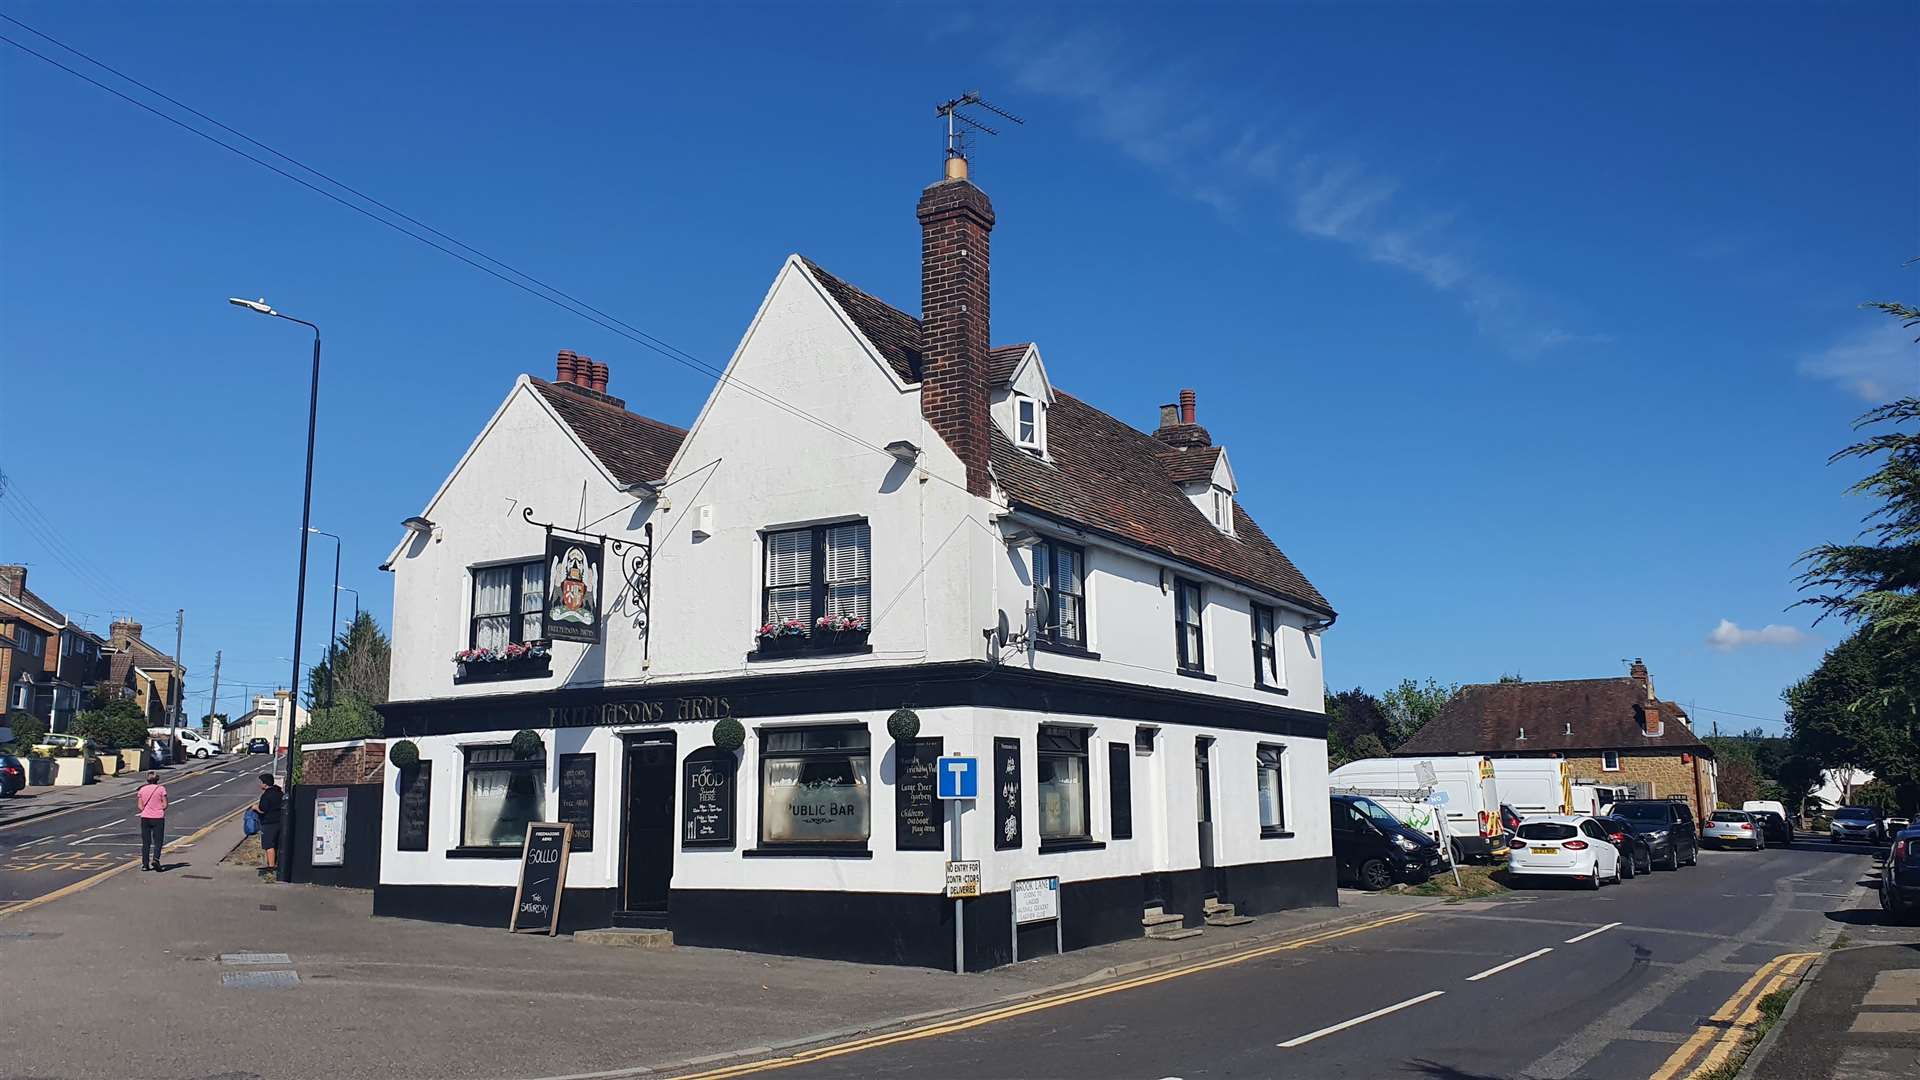 The Freemasons Arms in August 2022, the last pub in Snodland